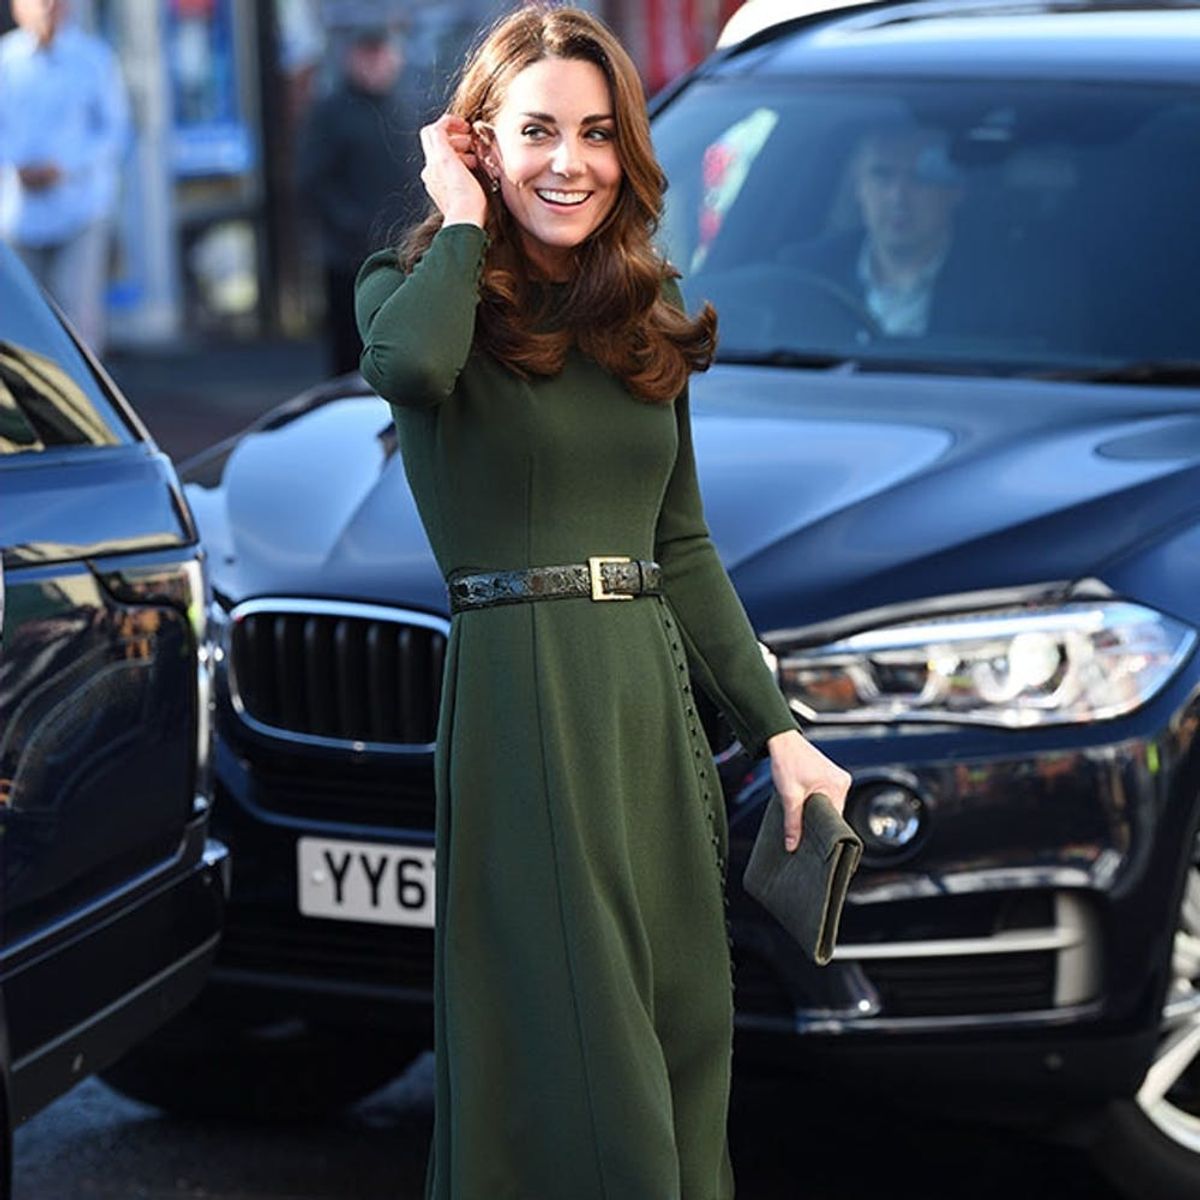 Kate Middleton’s Belted Green Dress Has a Secret Meaning